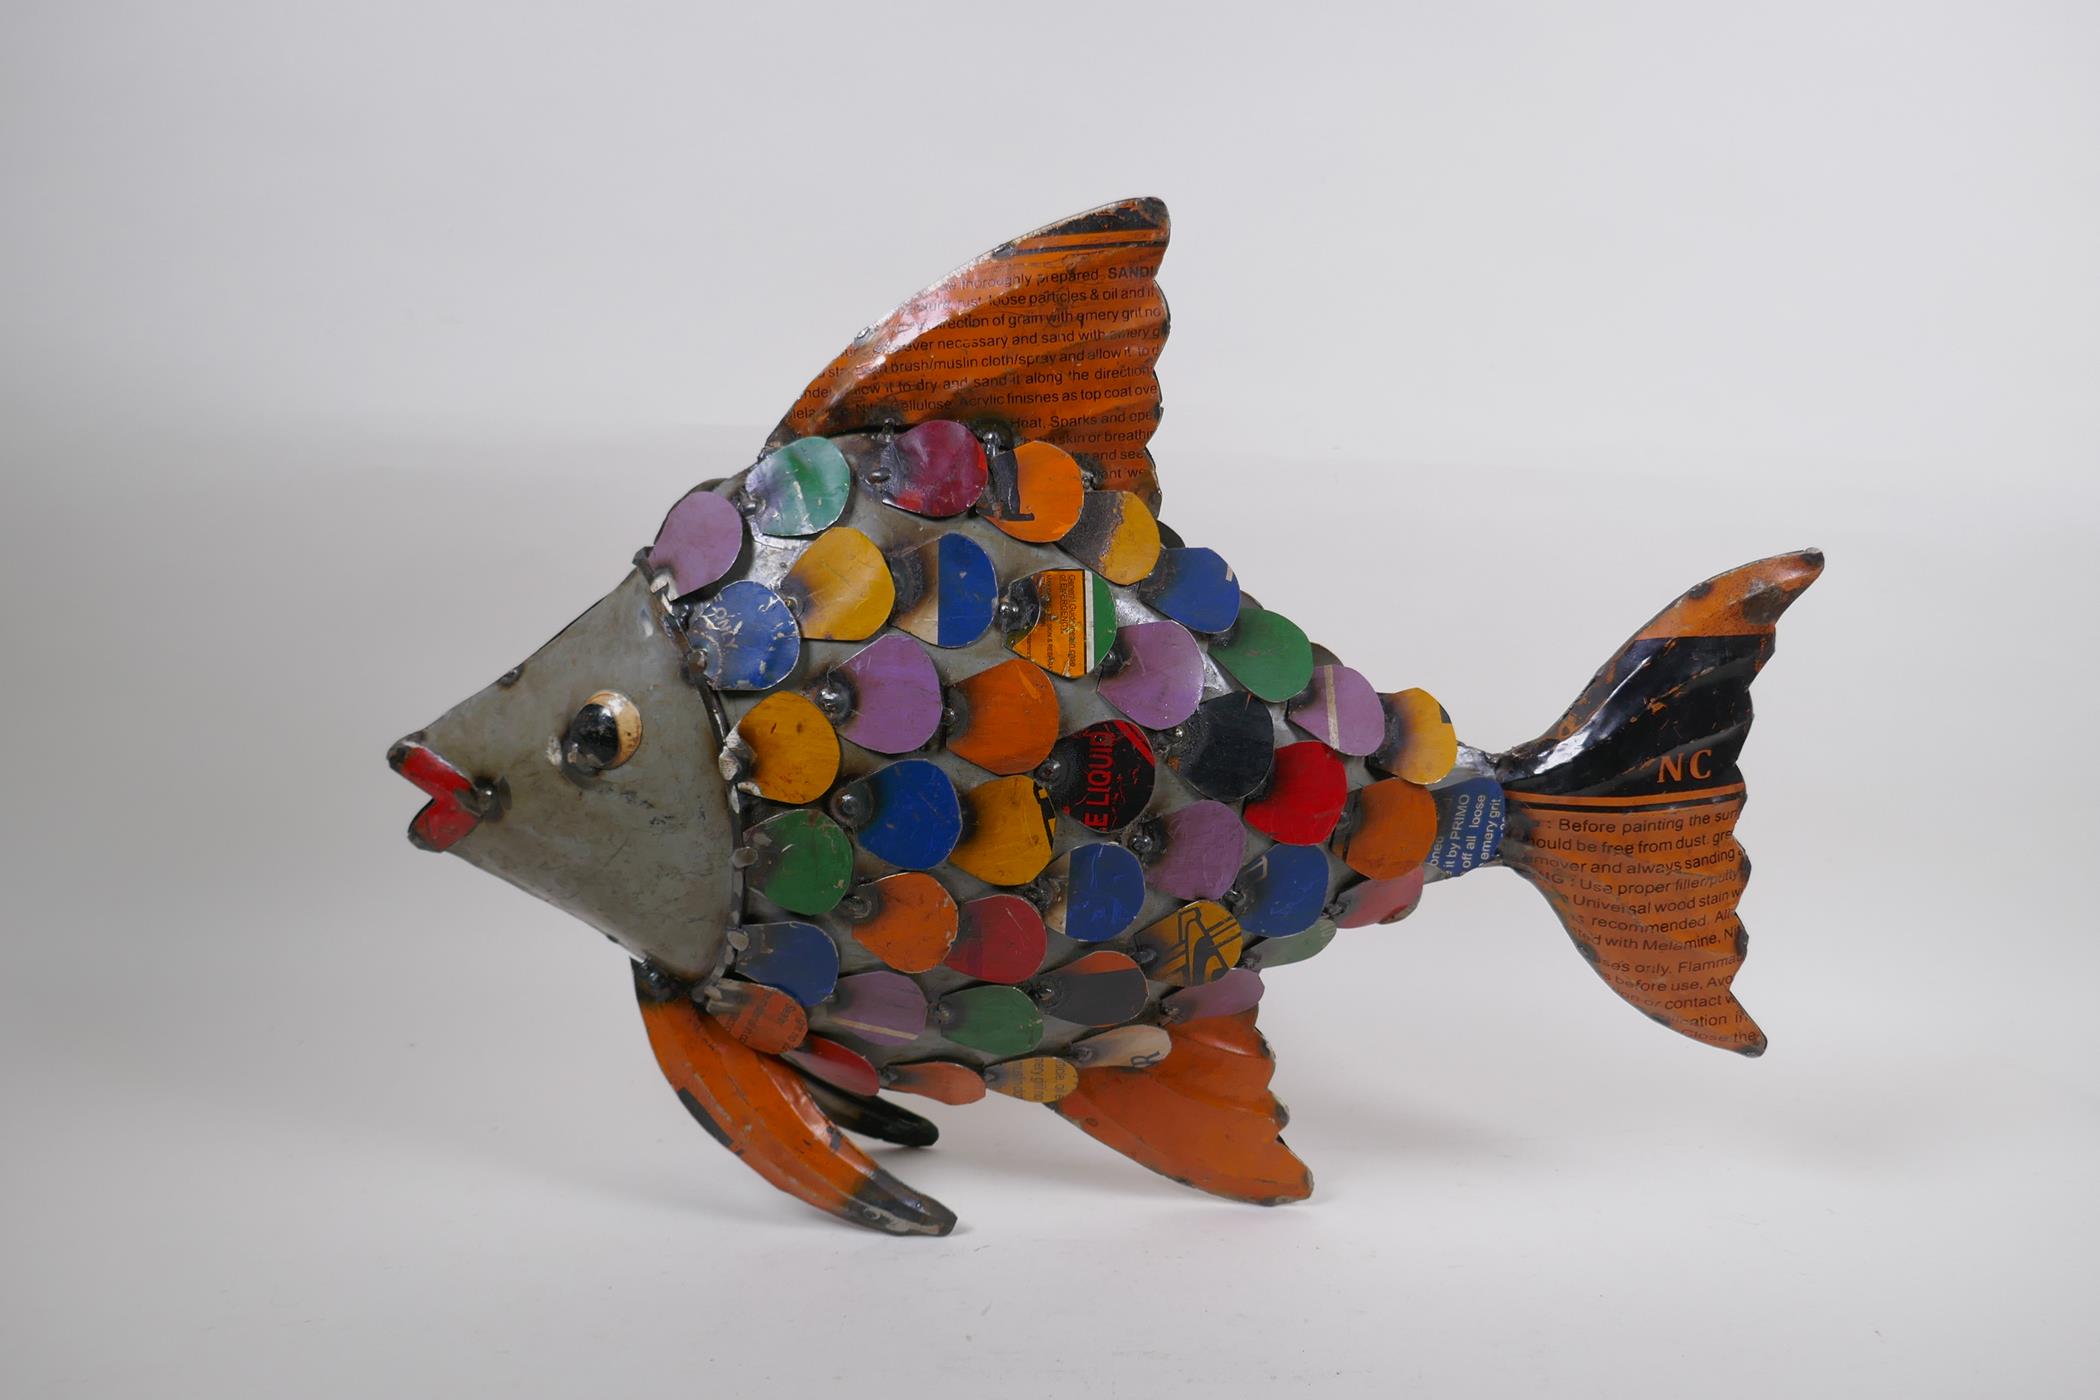 A recycled metal sculpture of a fish, 35cm high